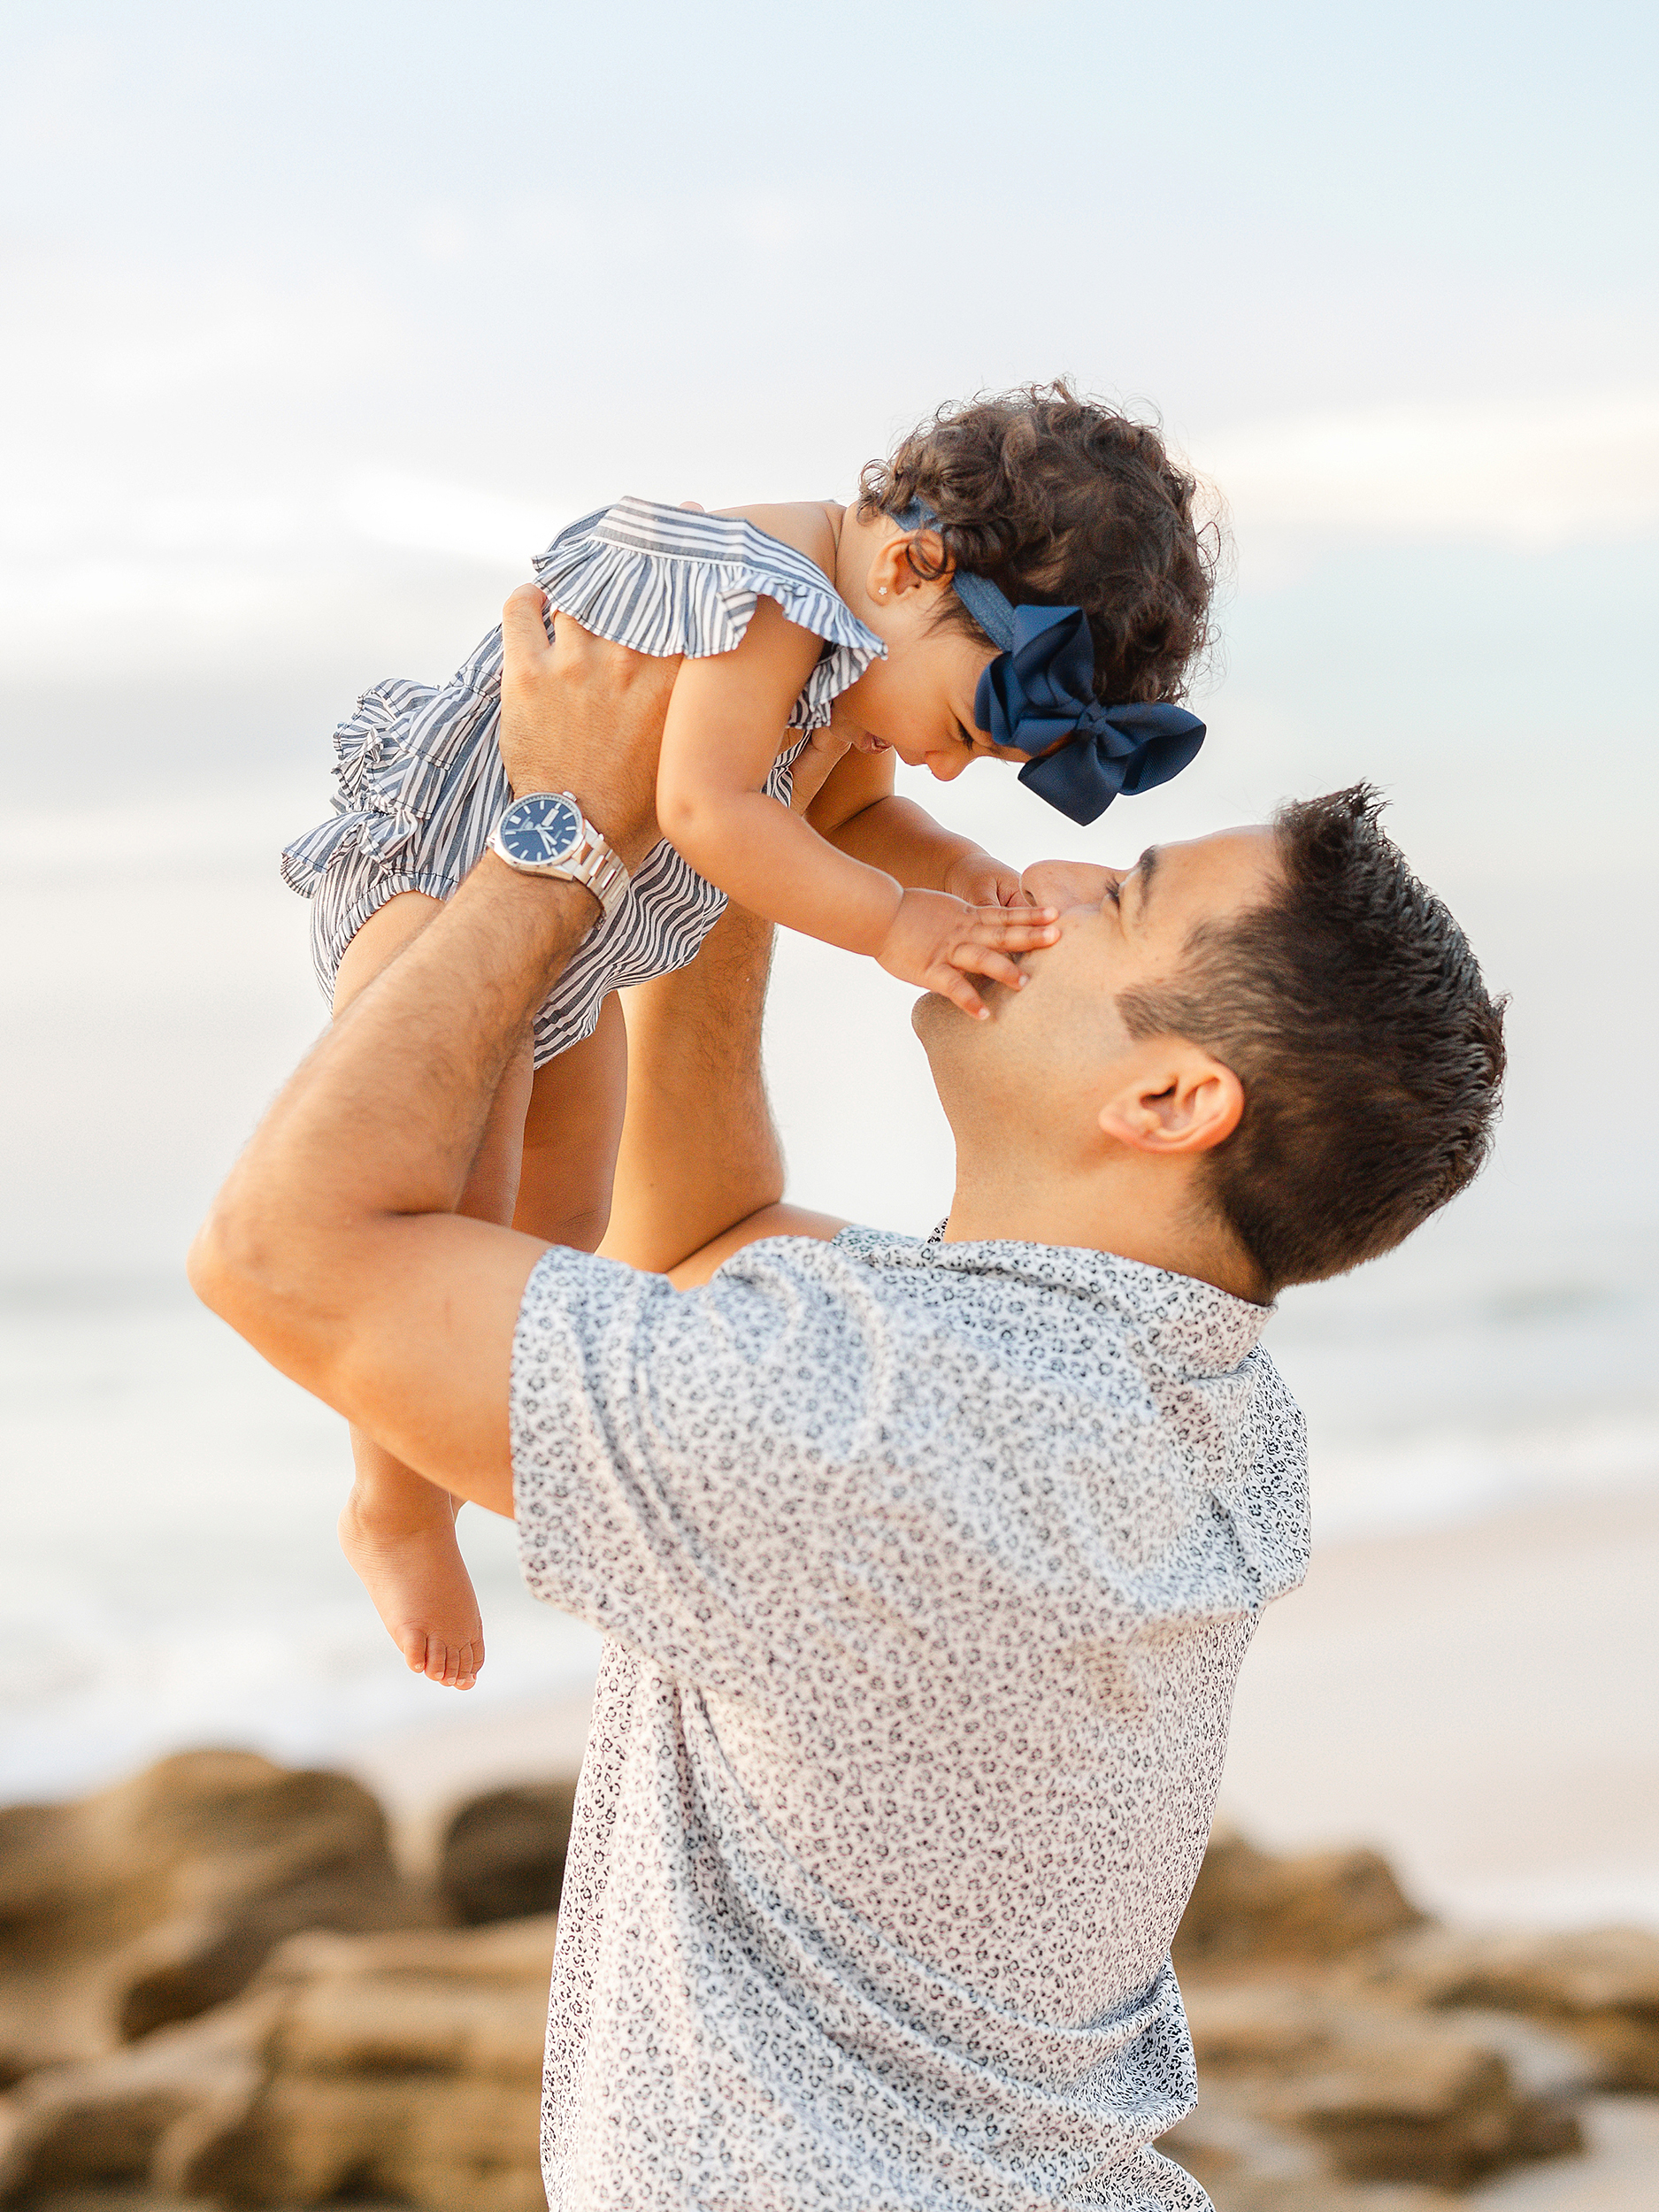 A man holding baby girl in the air at the beach at sunrise